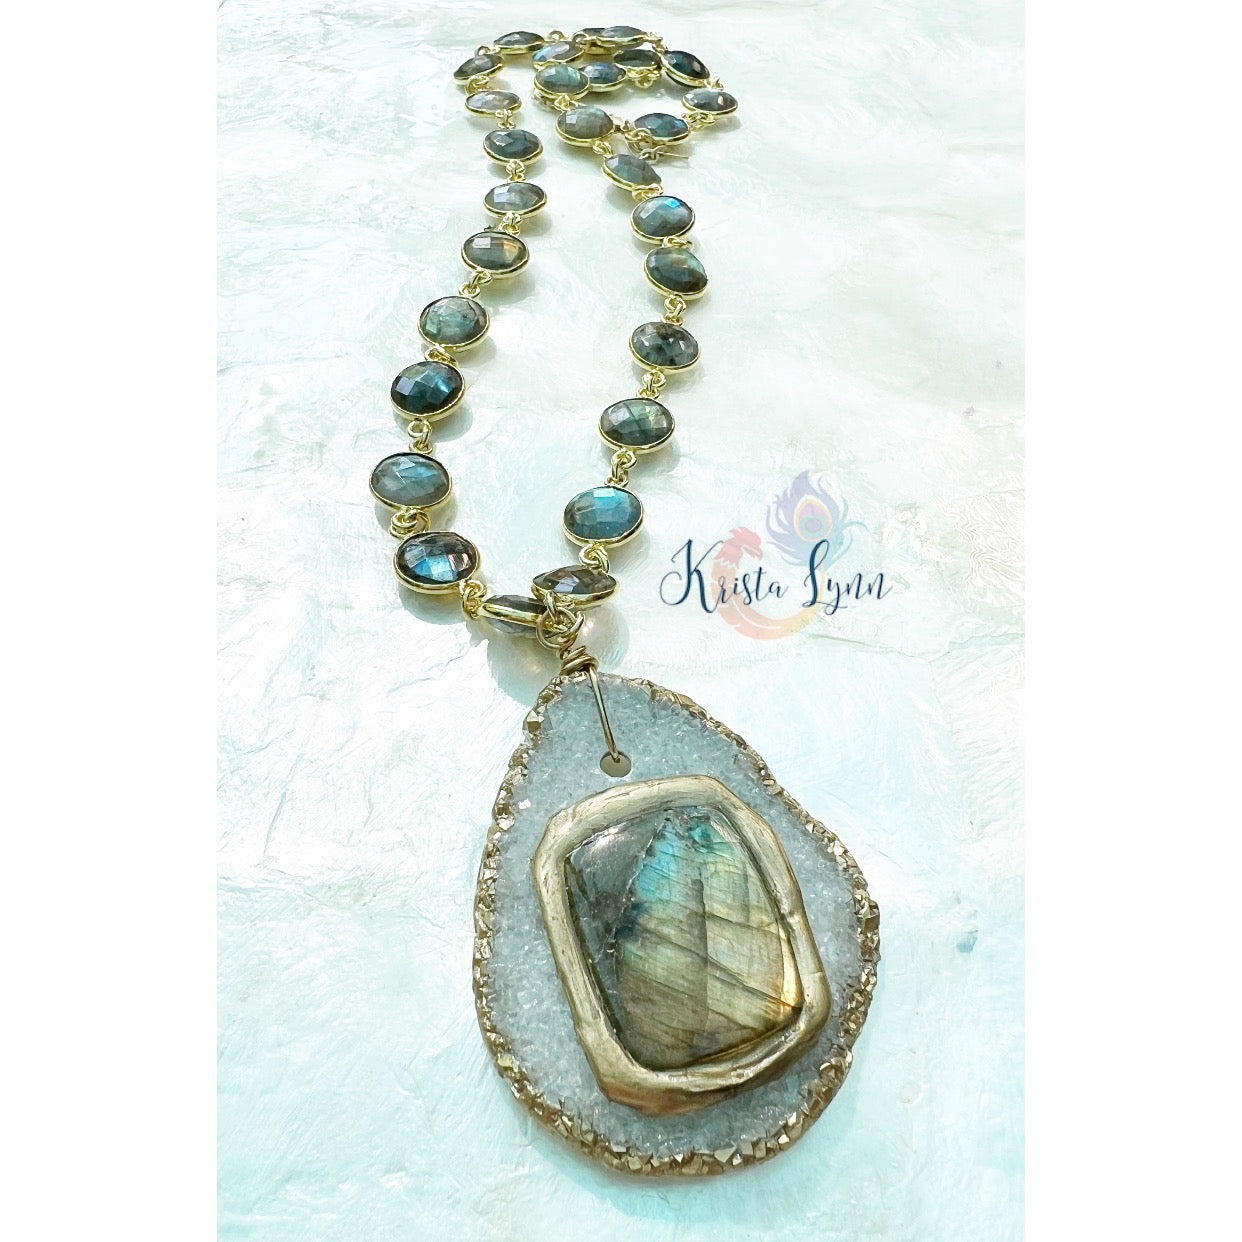 The Ray of Light Necklace / Labradorite